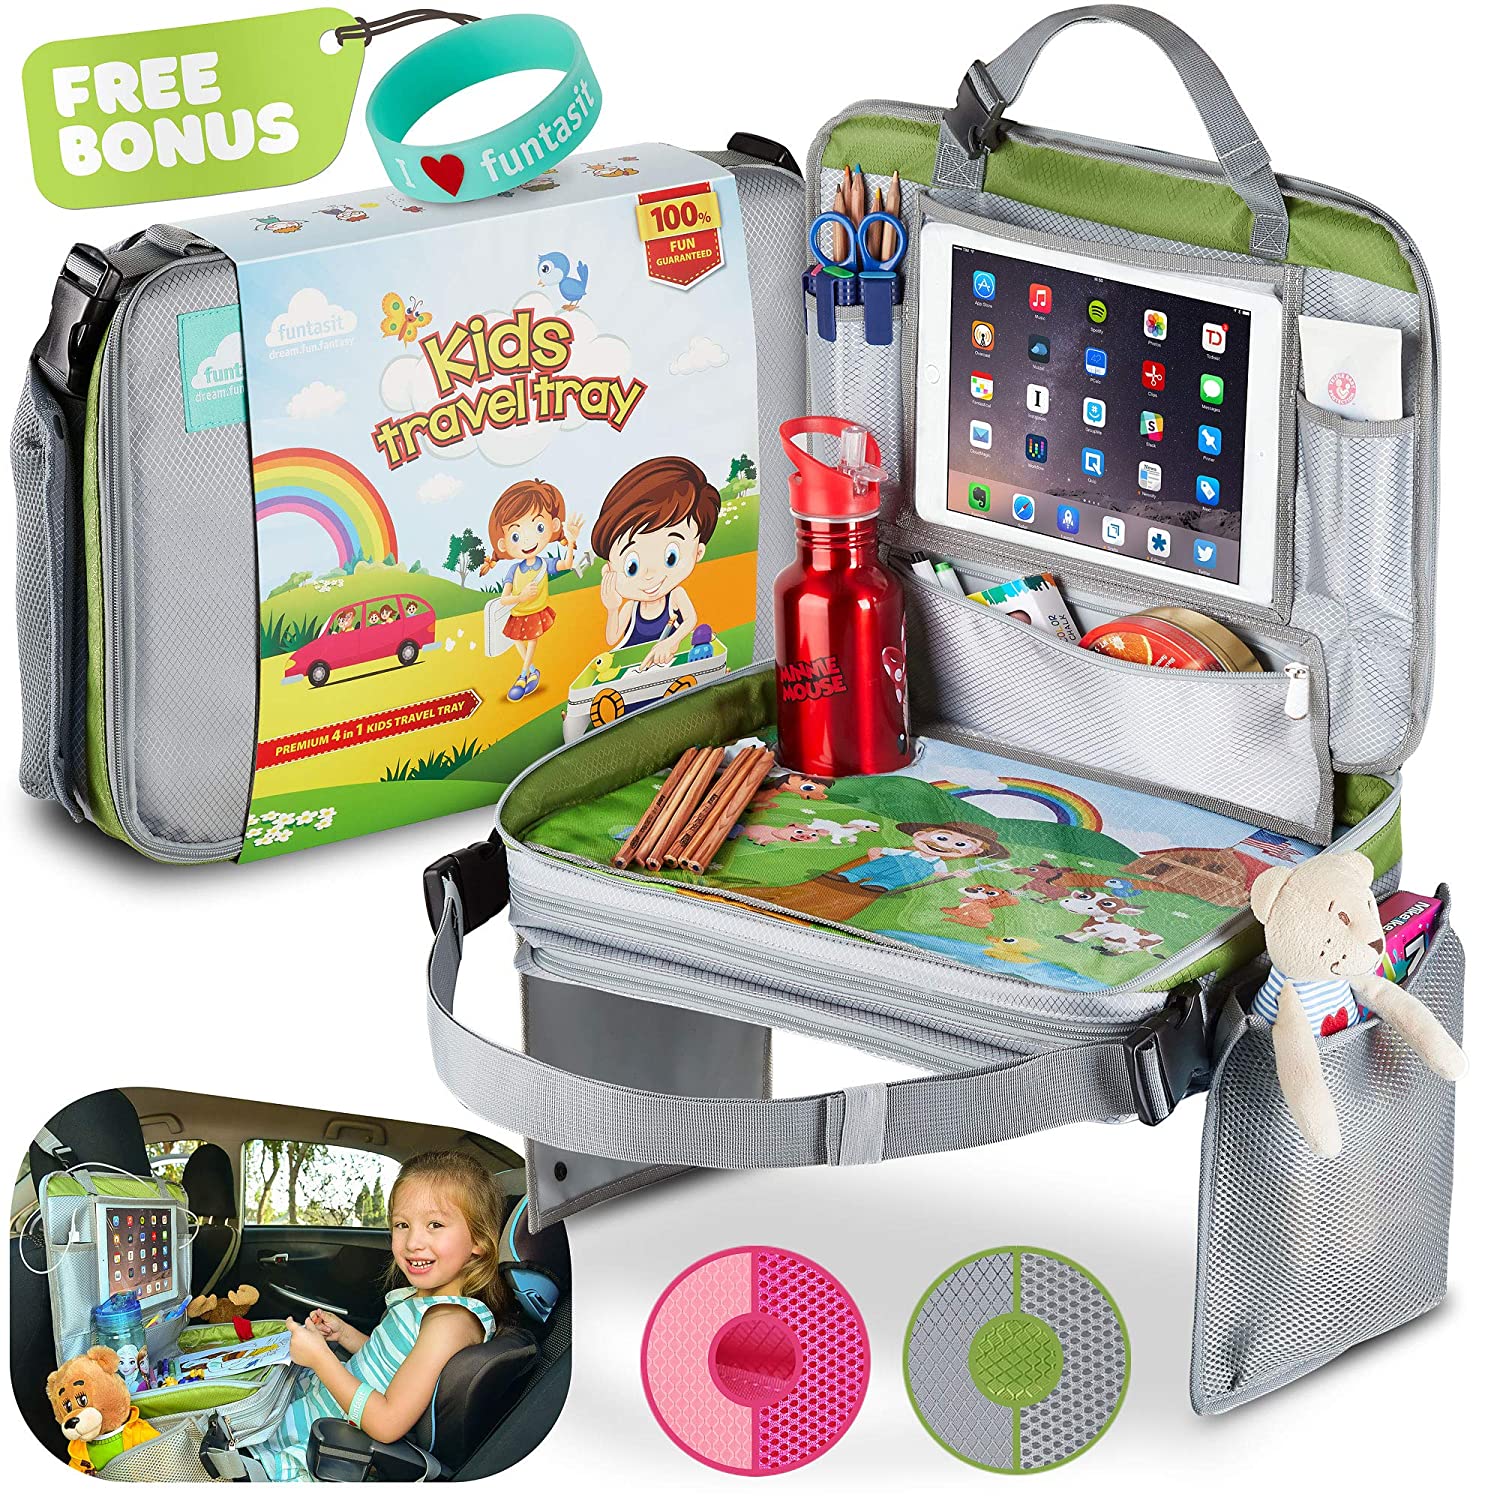 funtasit Kids Travel Tray All-in-One Carry Bag